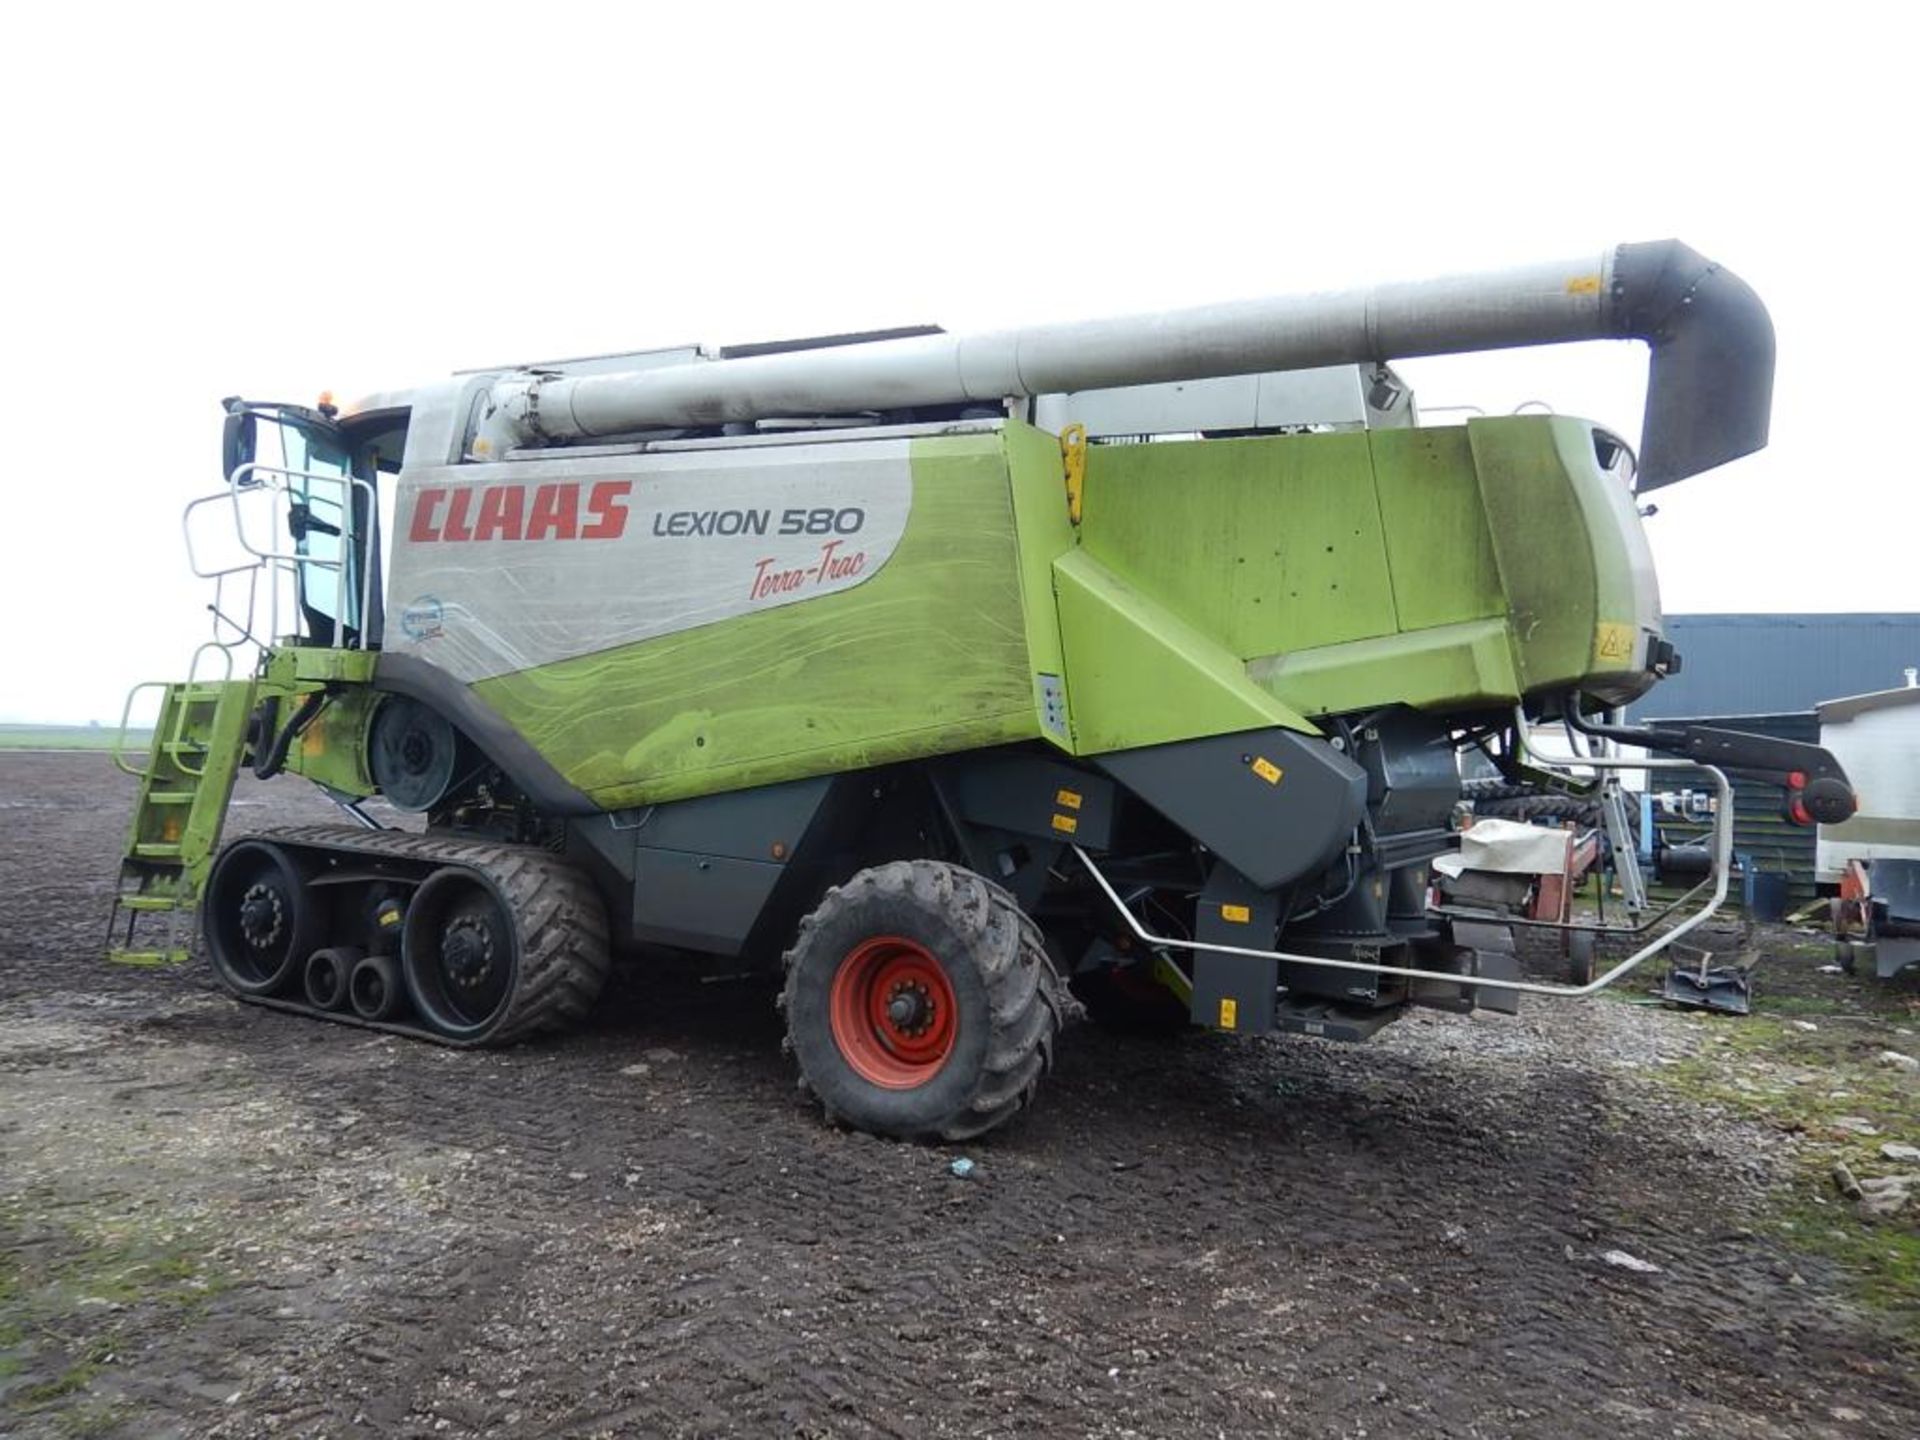 2004 CLAAS Lexion 580 Terra-Trac COMBINE HARVESTER Fitted with Claas Vario V900 Auto-Contour - Image 6 of 8